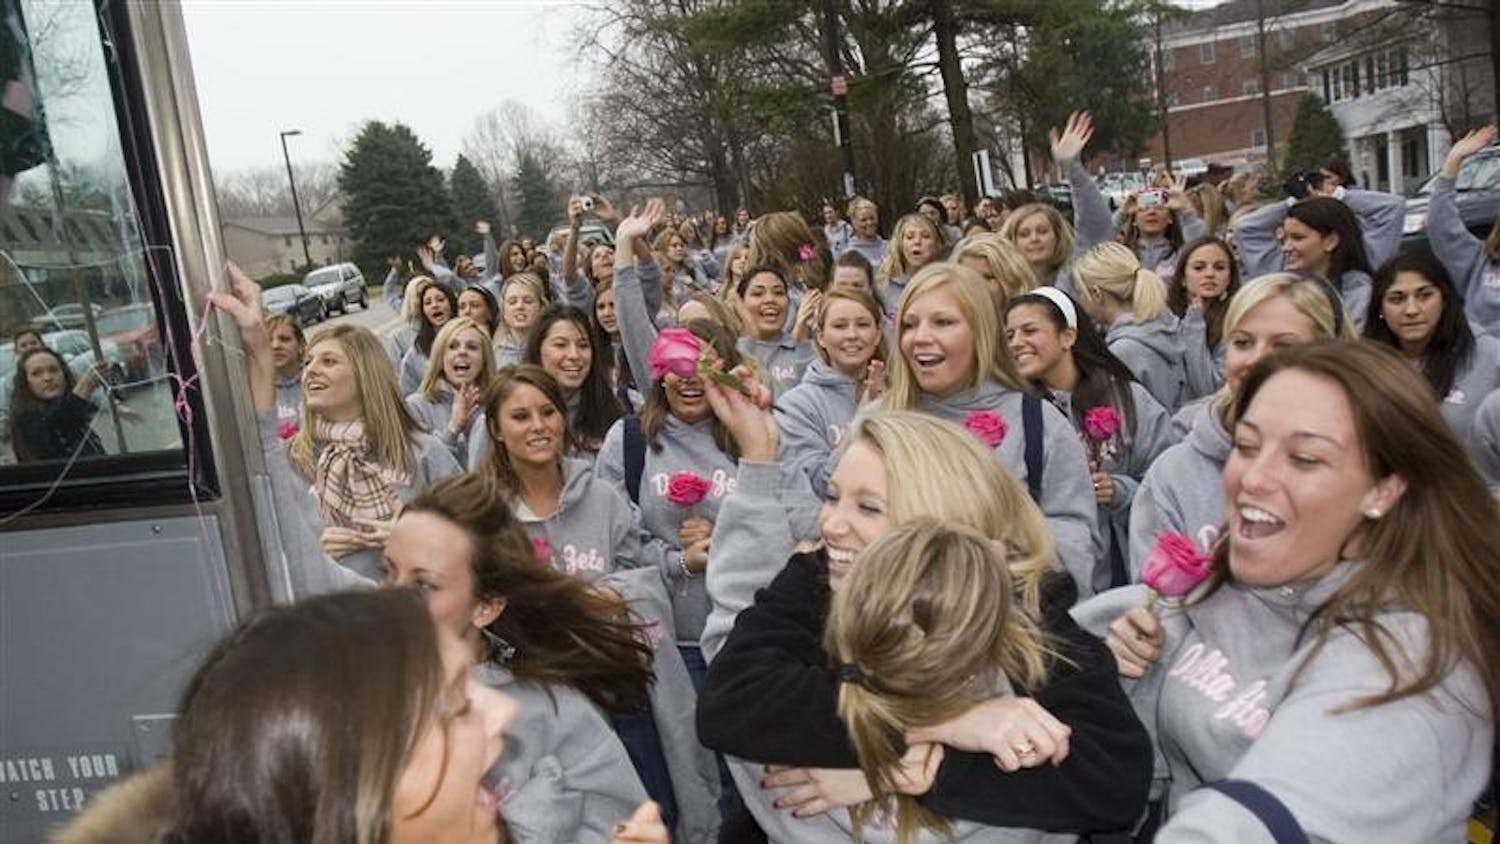 Two new members of Delta Zeta are greated by a sea of sisterhood after stepping off the bus on Jan. 7, 2007 at the sorority house.